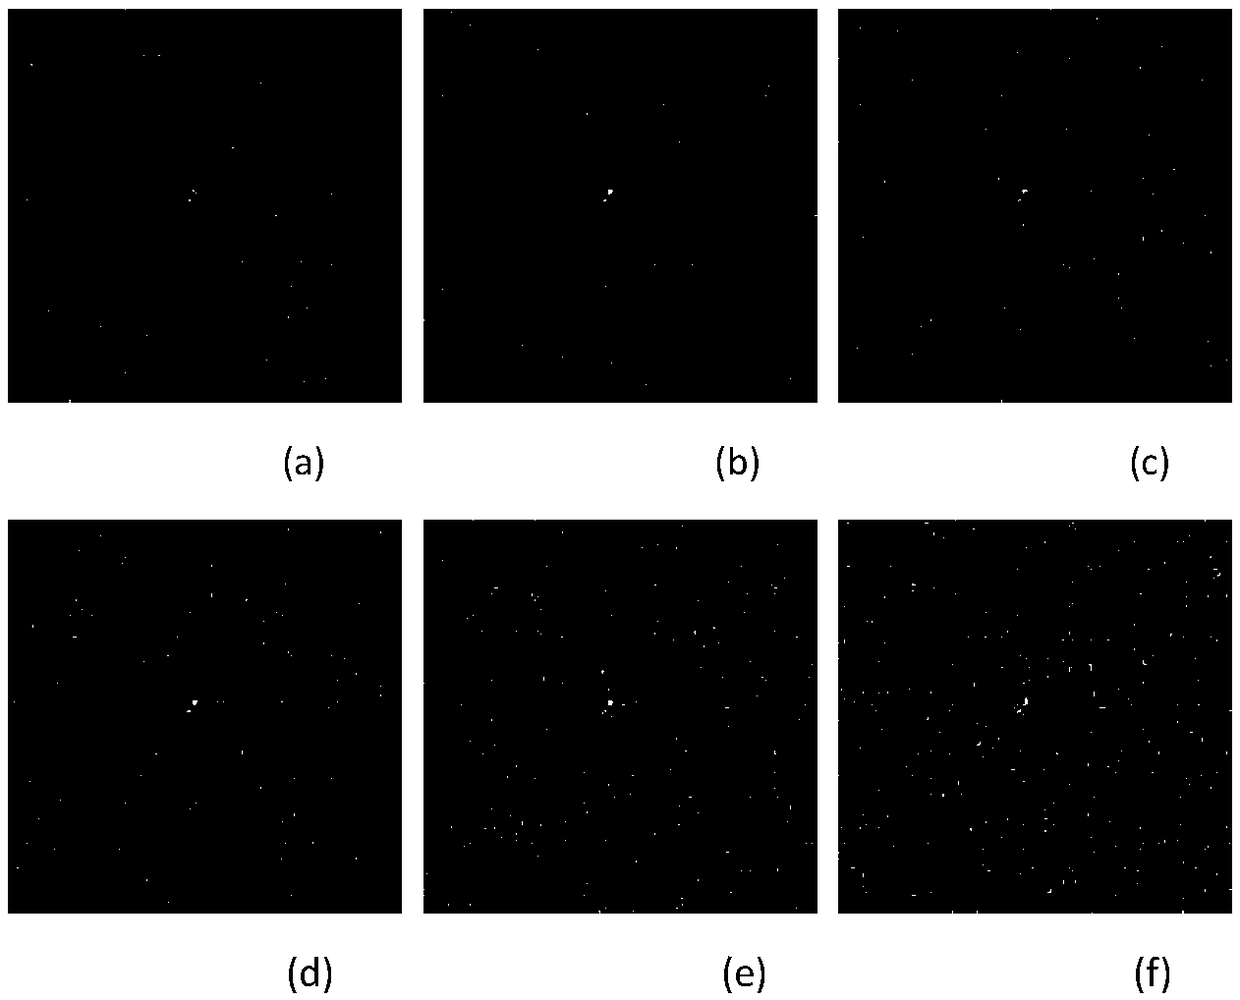 SAR image classification based on 2D-PCA and convolution neural network